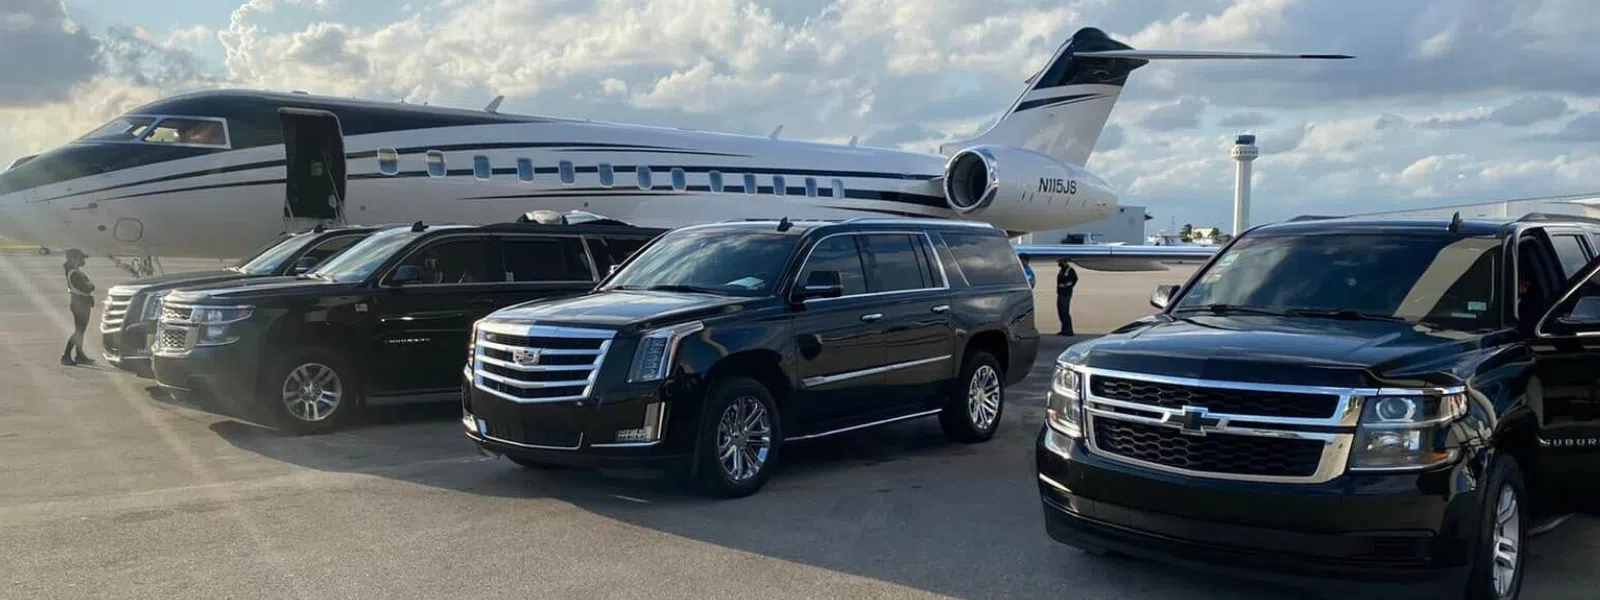 Limo Service at Fort Lauderdale Airport by JM LIMOS FL